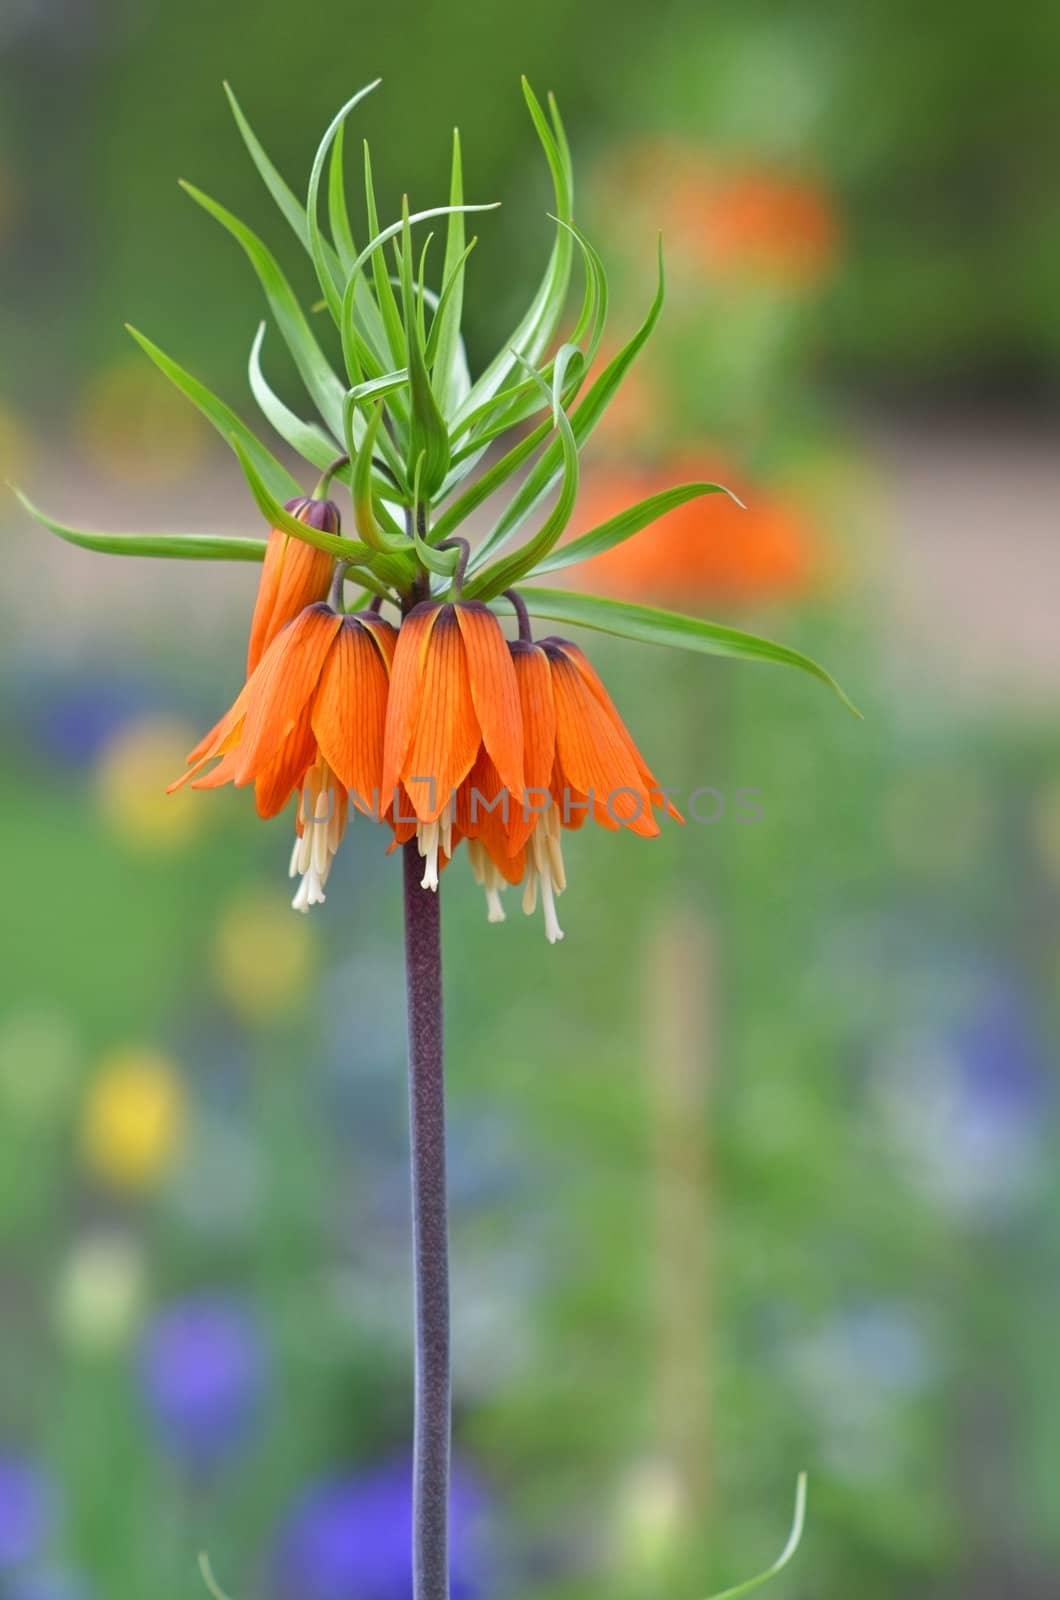 Fritillaria imperialis known as Crown imperial is spring blooming garden flower.